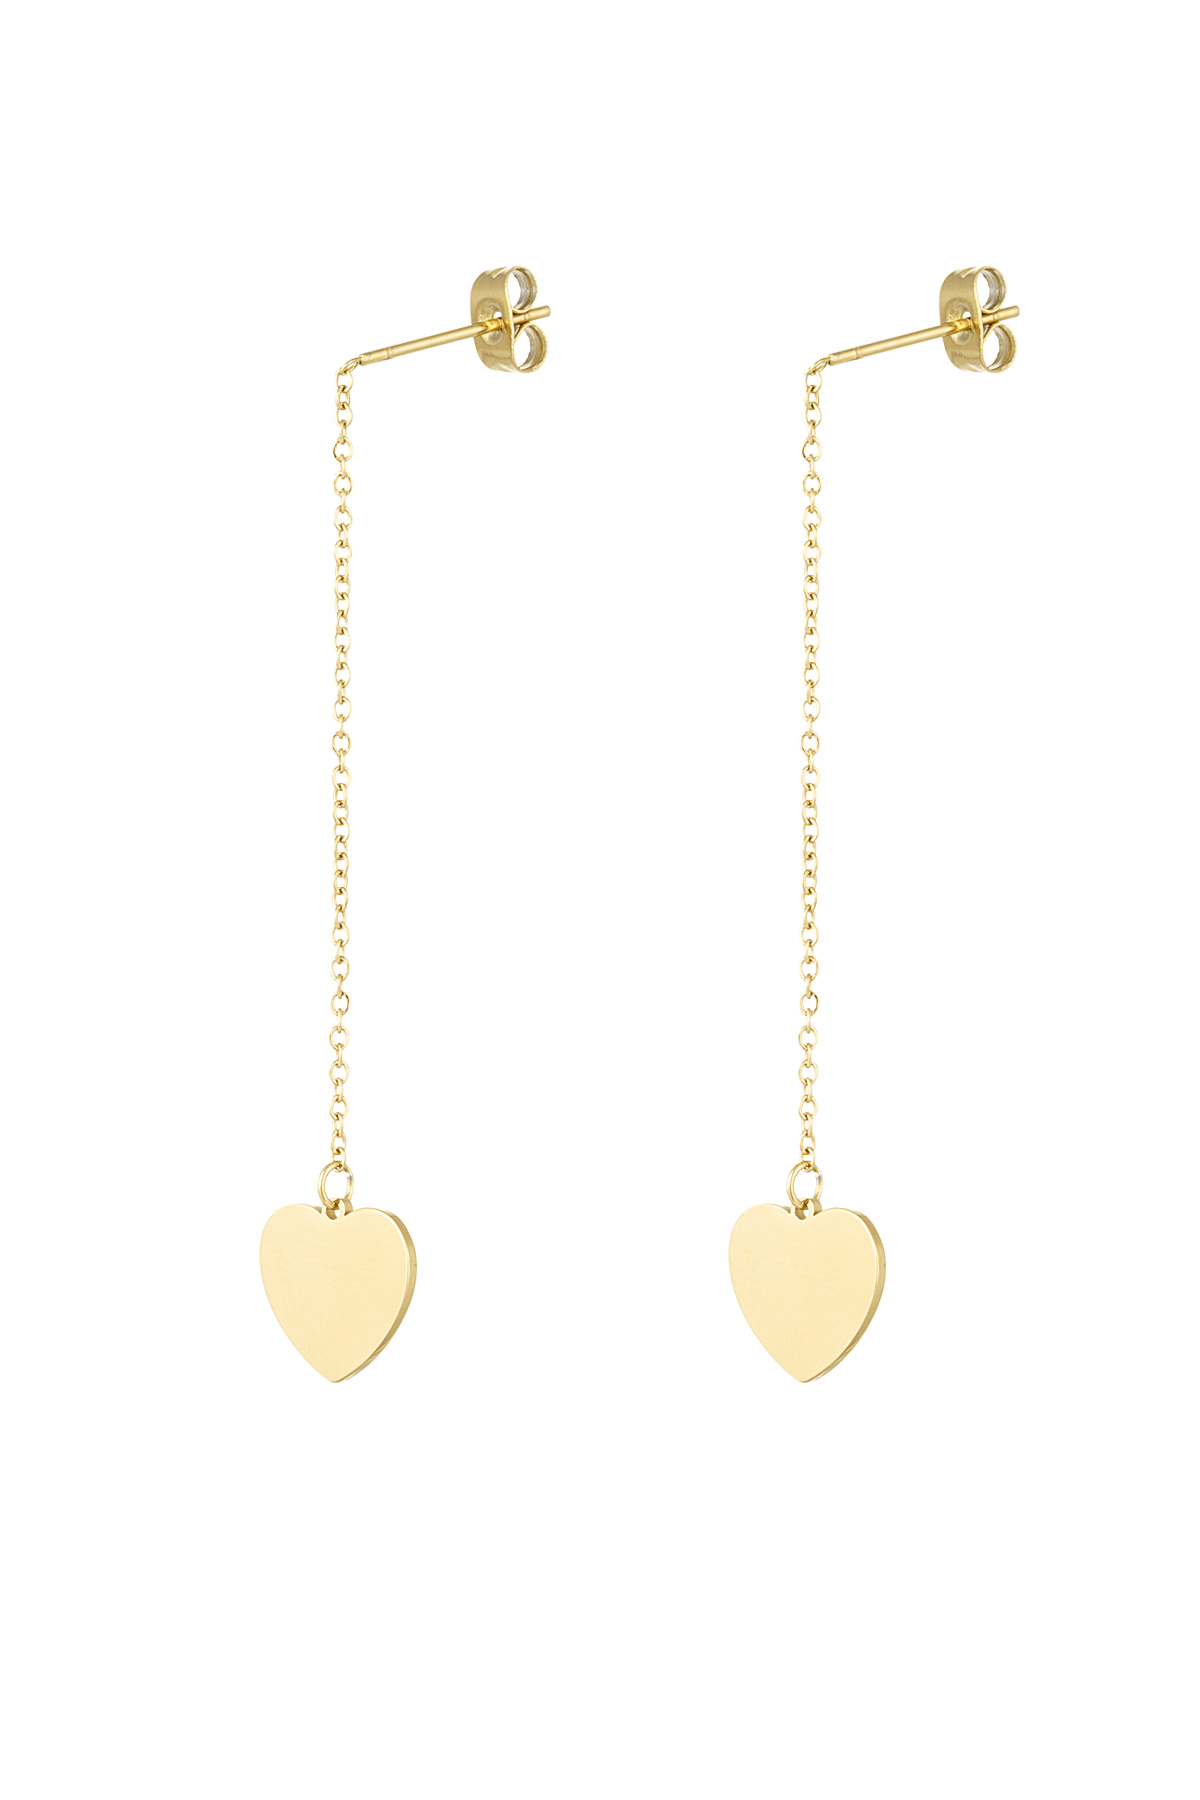 Earrings chain with heart - gold h5 